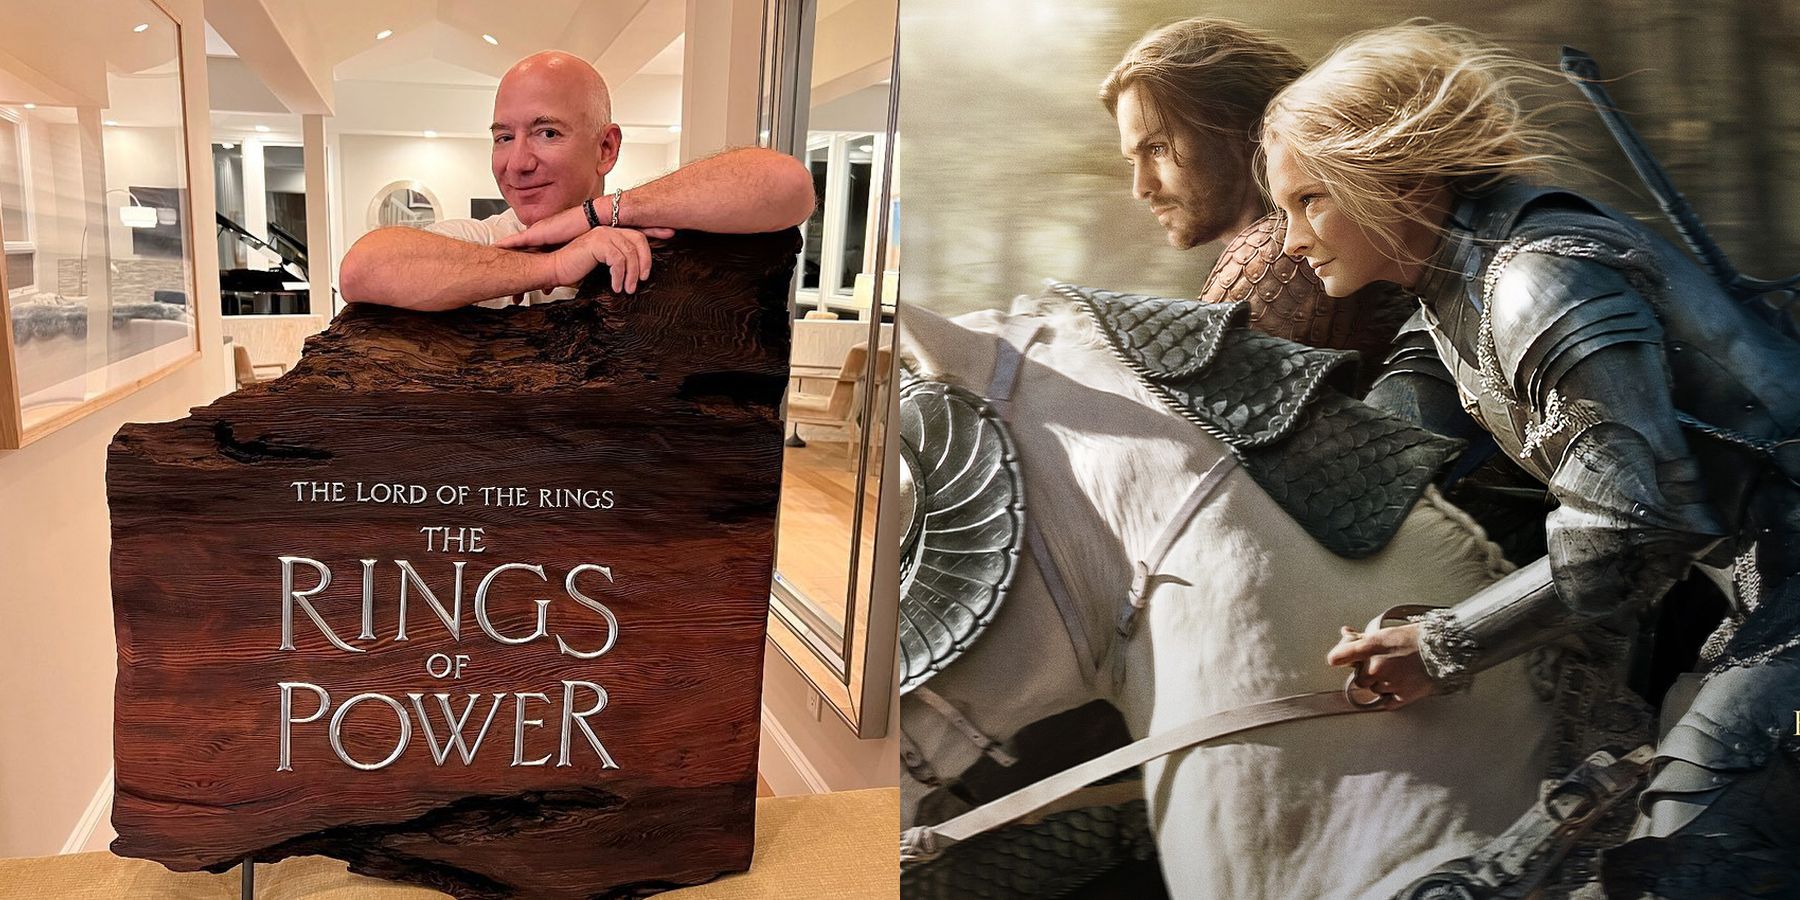 Jeff Bezos Lord of the Rings of Power